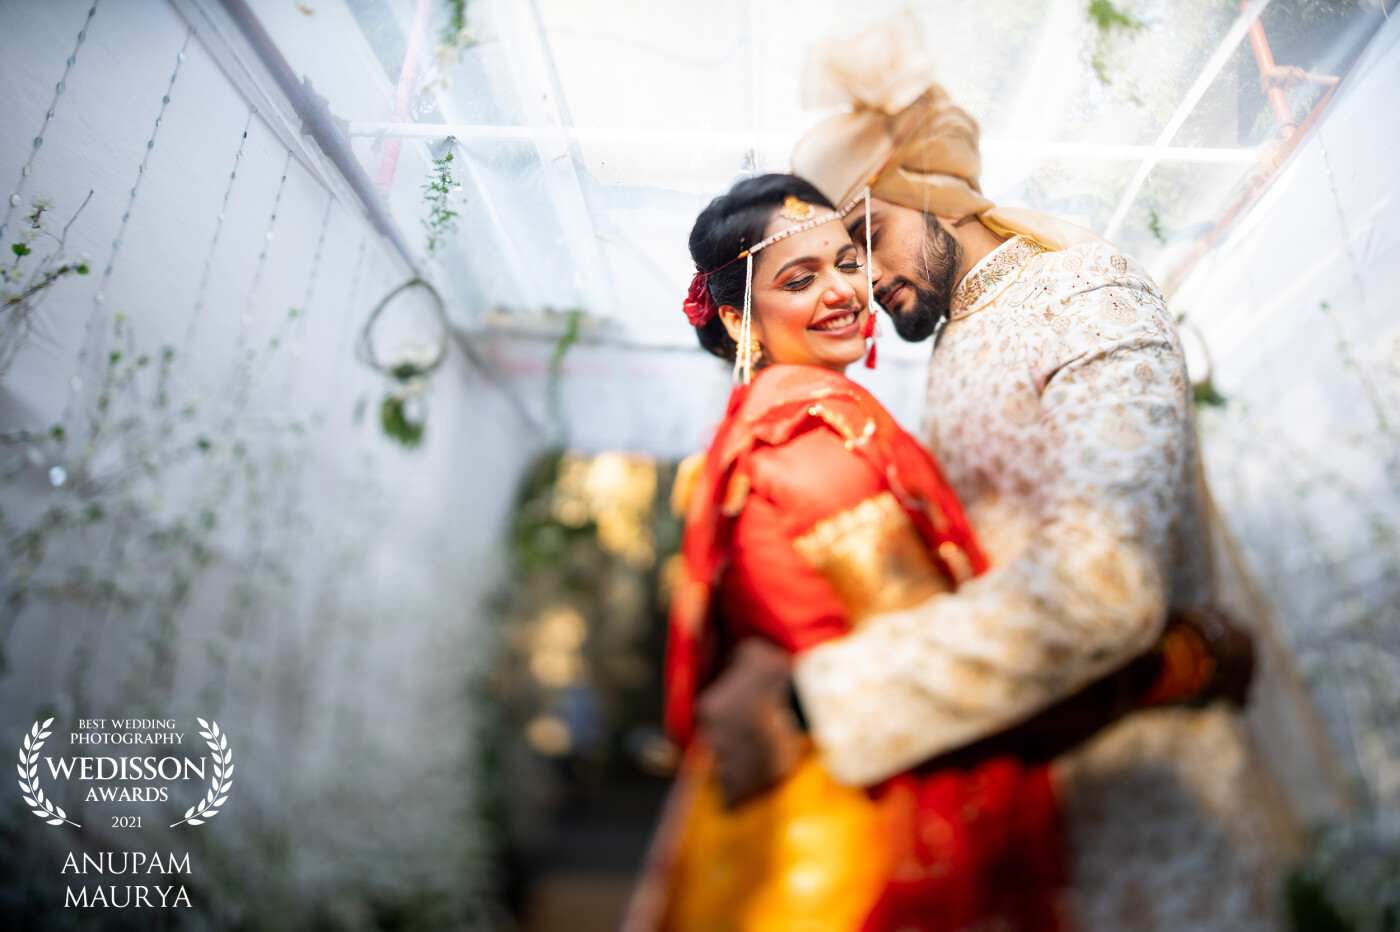 We got our couple Ankur and Akshata out from their wedding rituals, spotting some beautiful light, and this is the result you can see. This was a beautiful Maharashtrian wedding, we still have so many fond memories :)